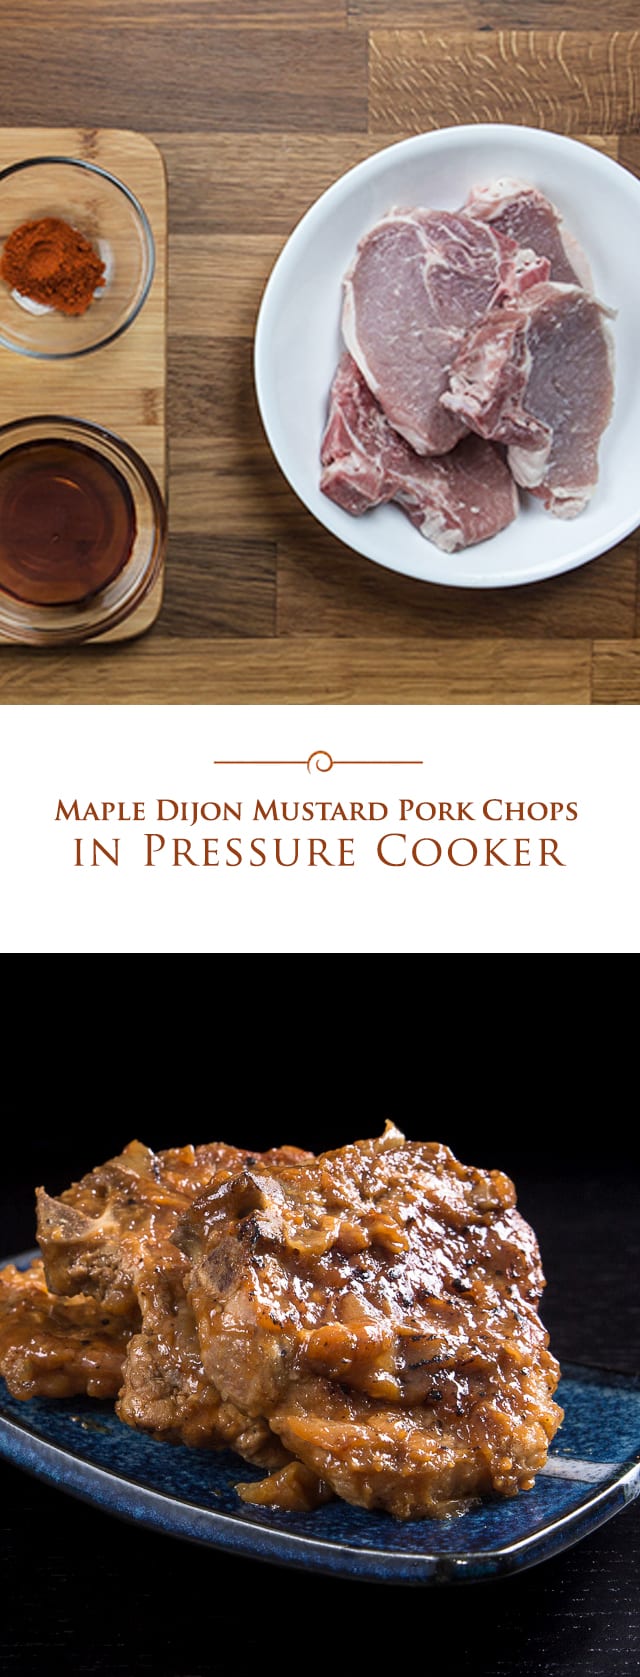 photo collage of Maple Dijon Mustard Pork Chops made in a pressure cooker